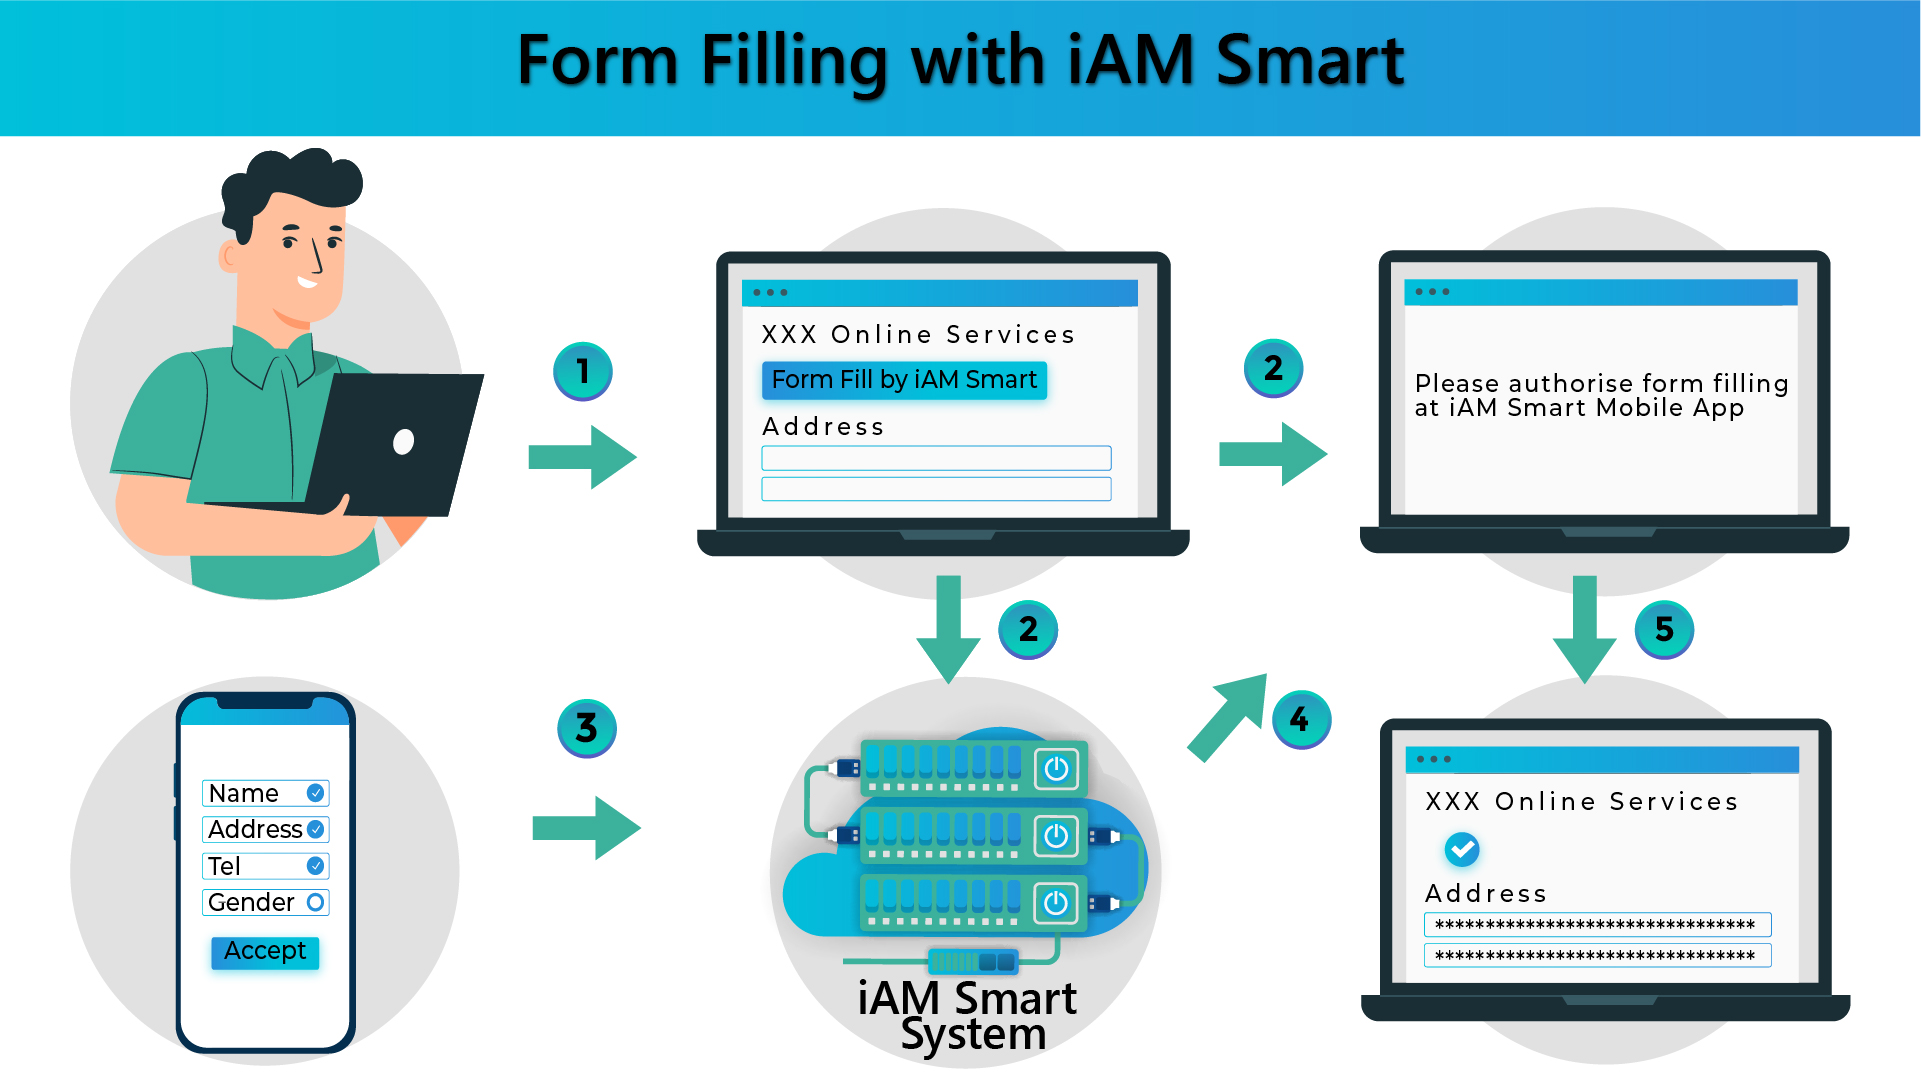 Form Filling with "iAM Smart"